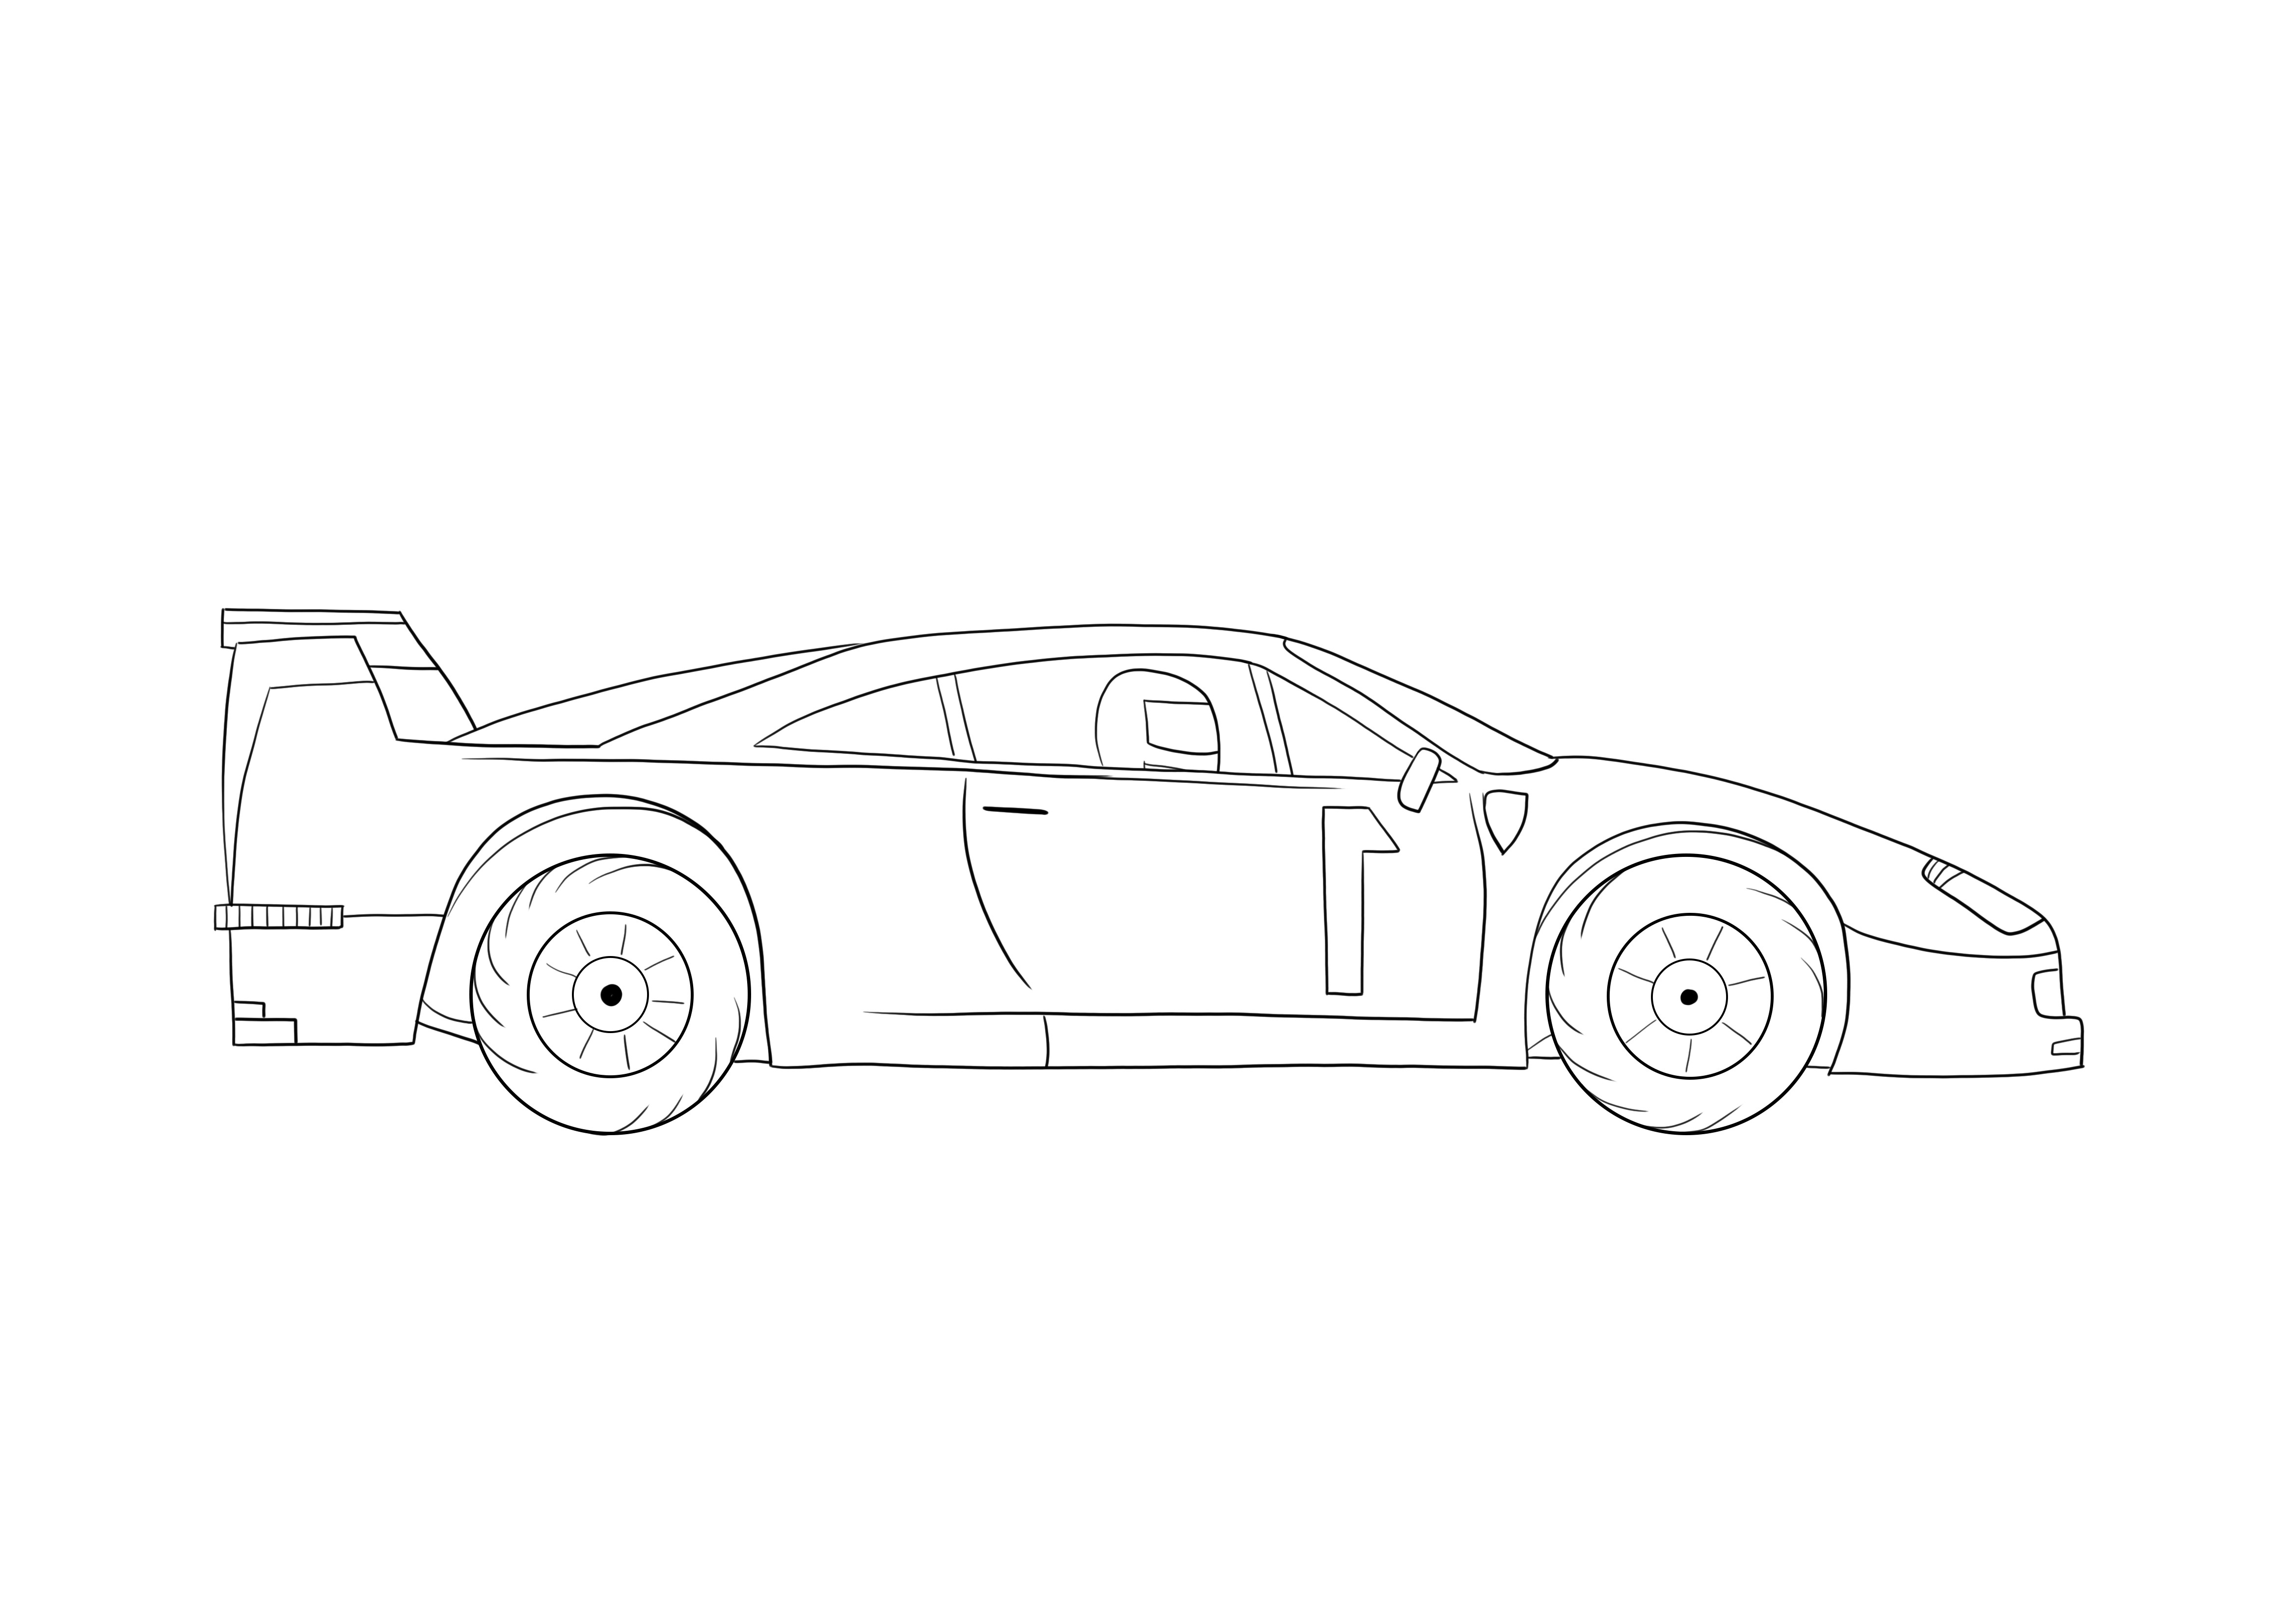 Race car for printing or downloading a free picture